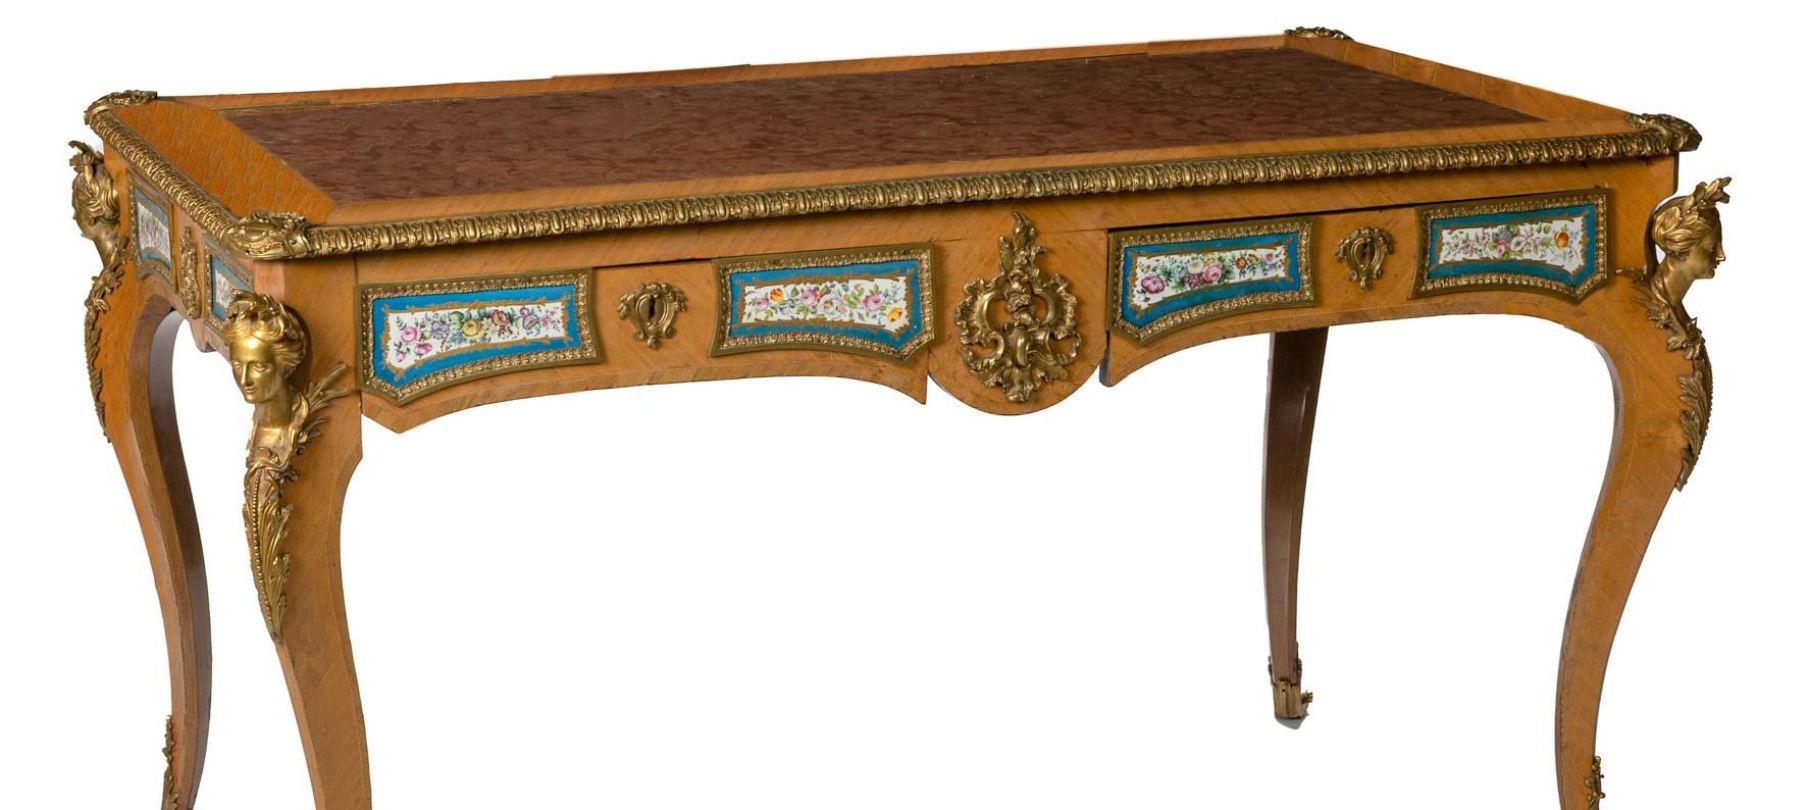 Hand-Carved French Louis XV-style Bureau Plat With Sevres Porcelain Plaques, 19 Century For Sale